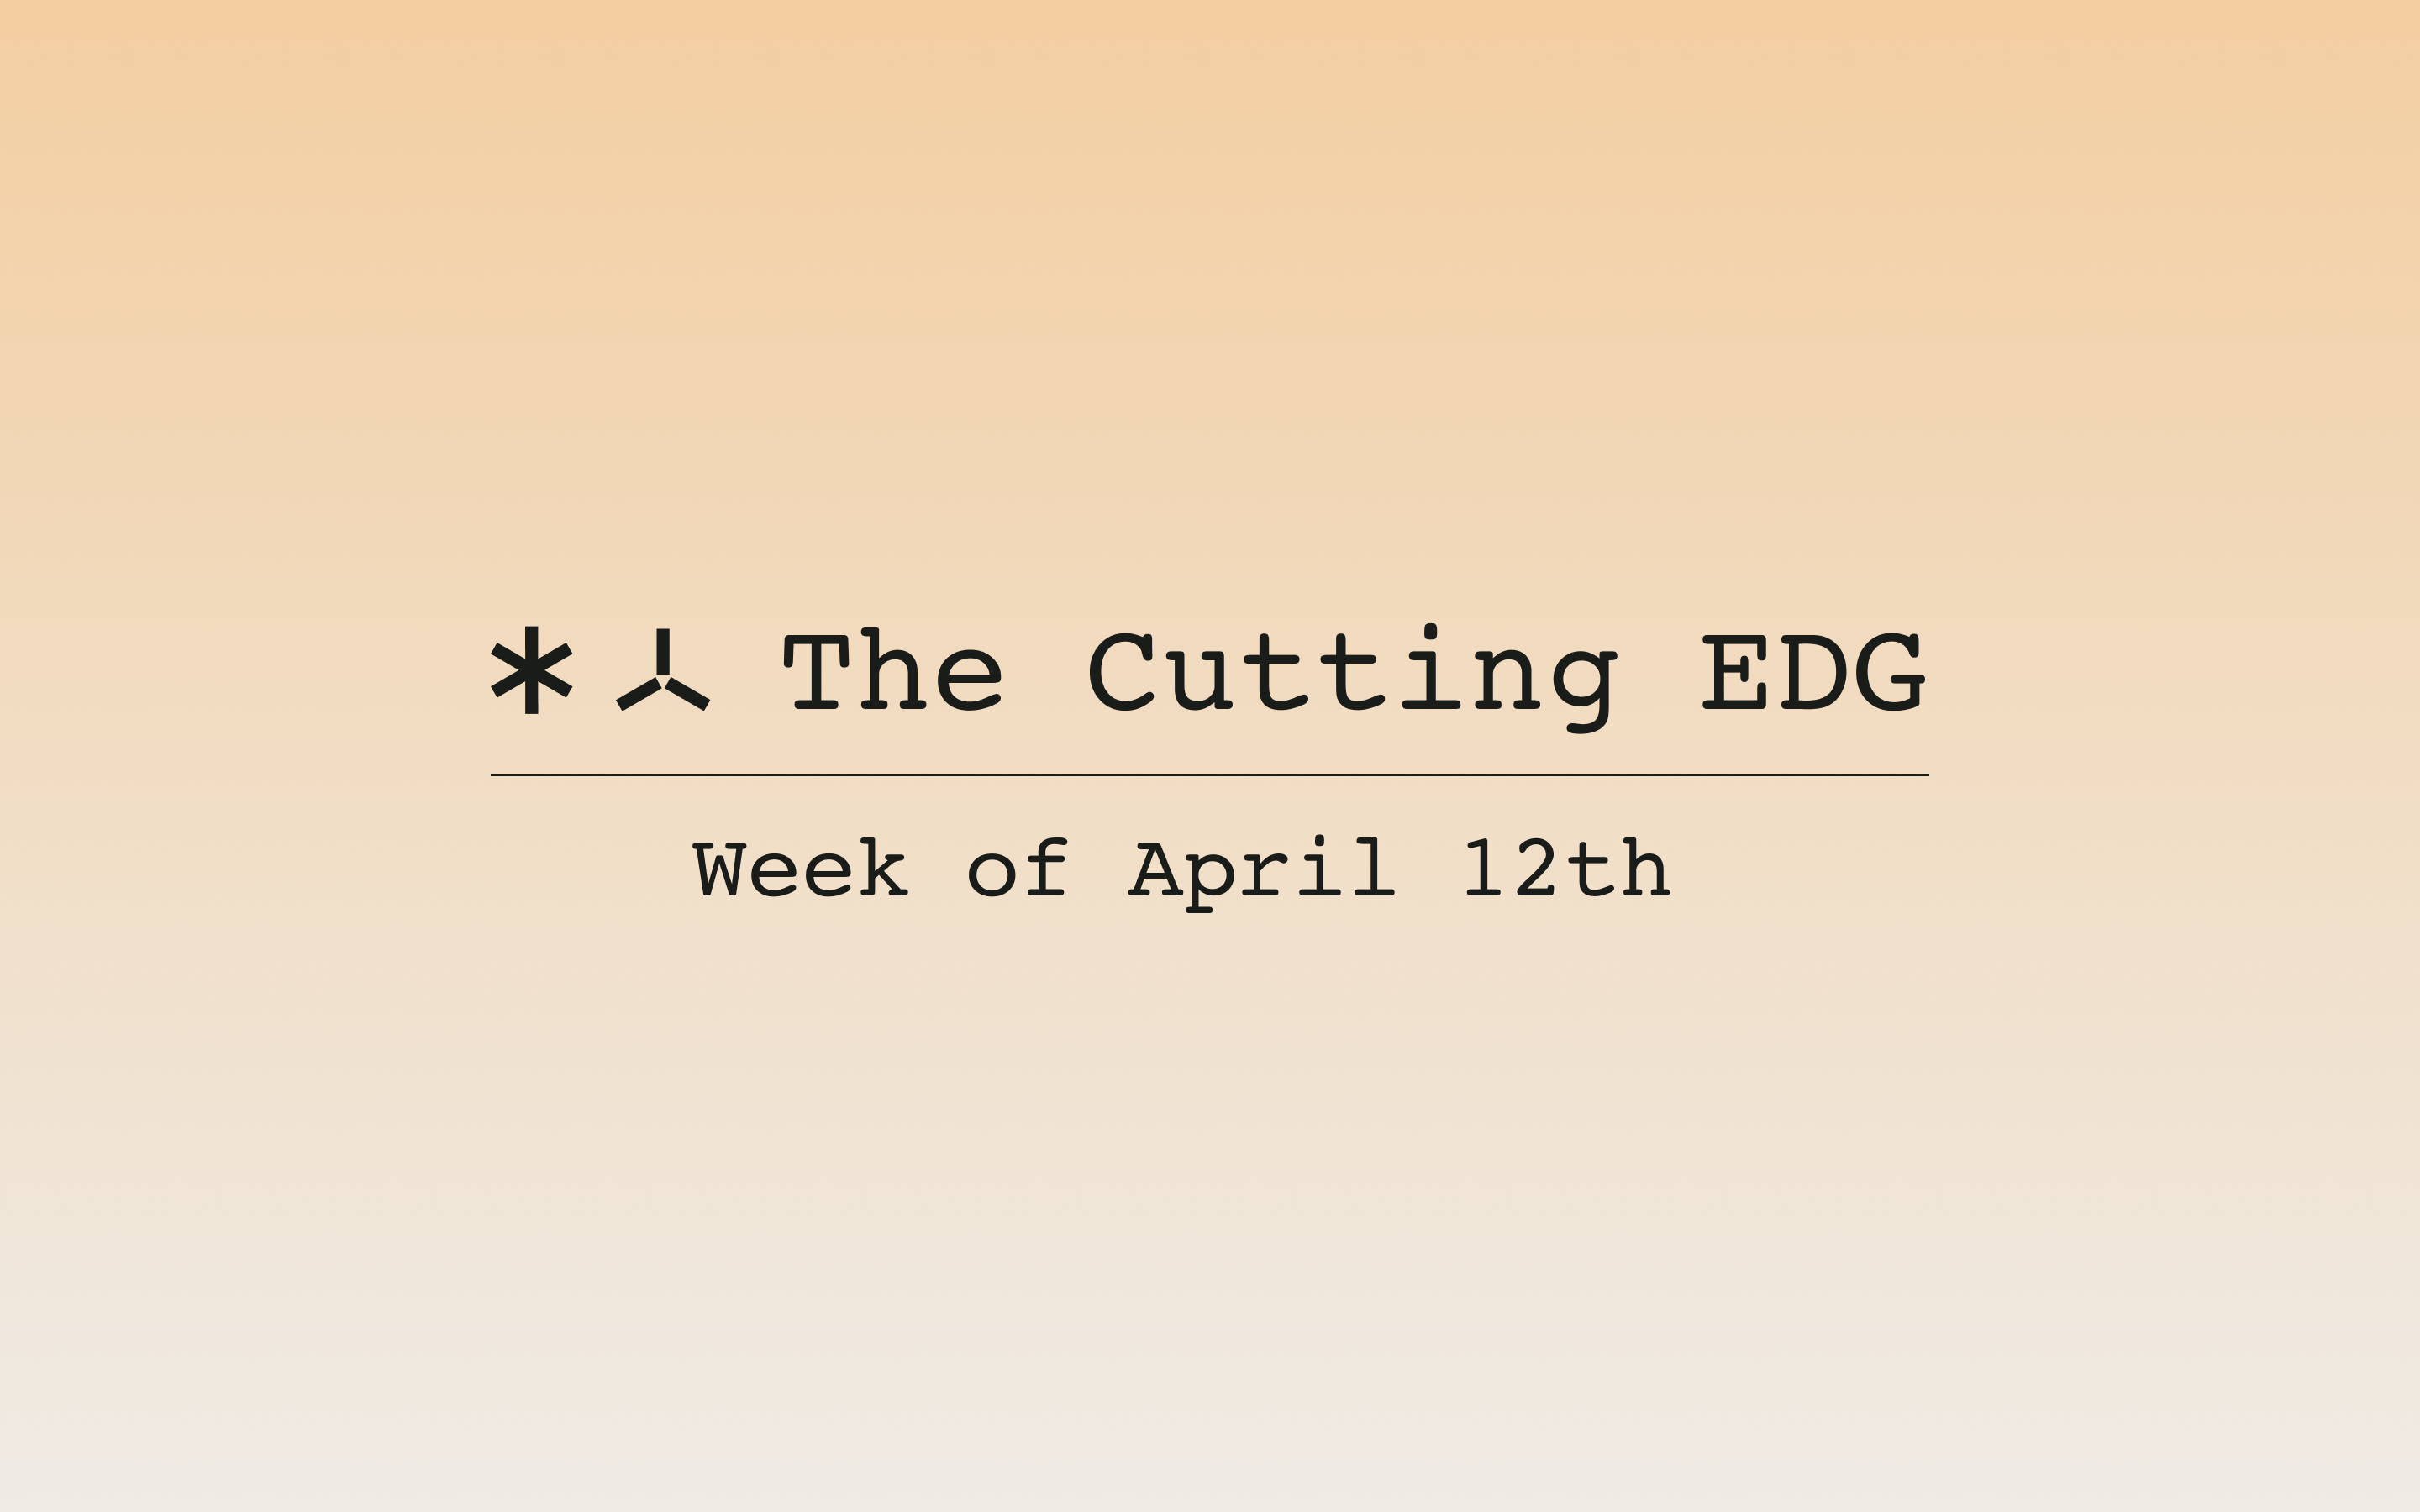 The Cutting EDG: Week of April 12th